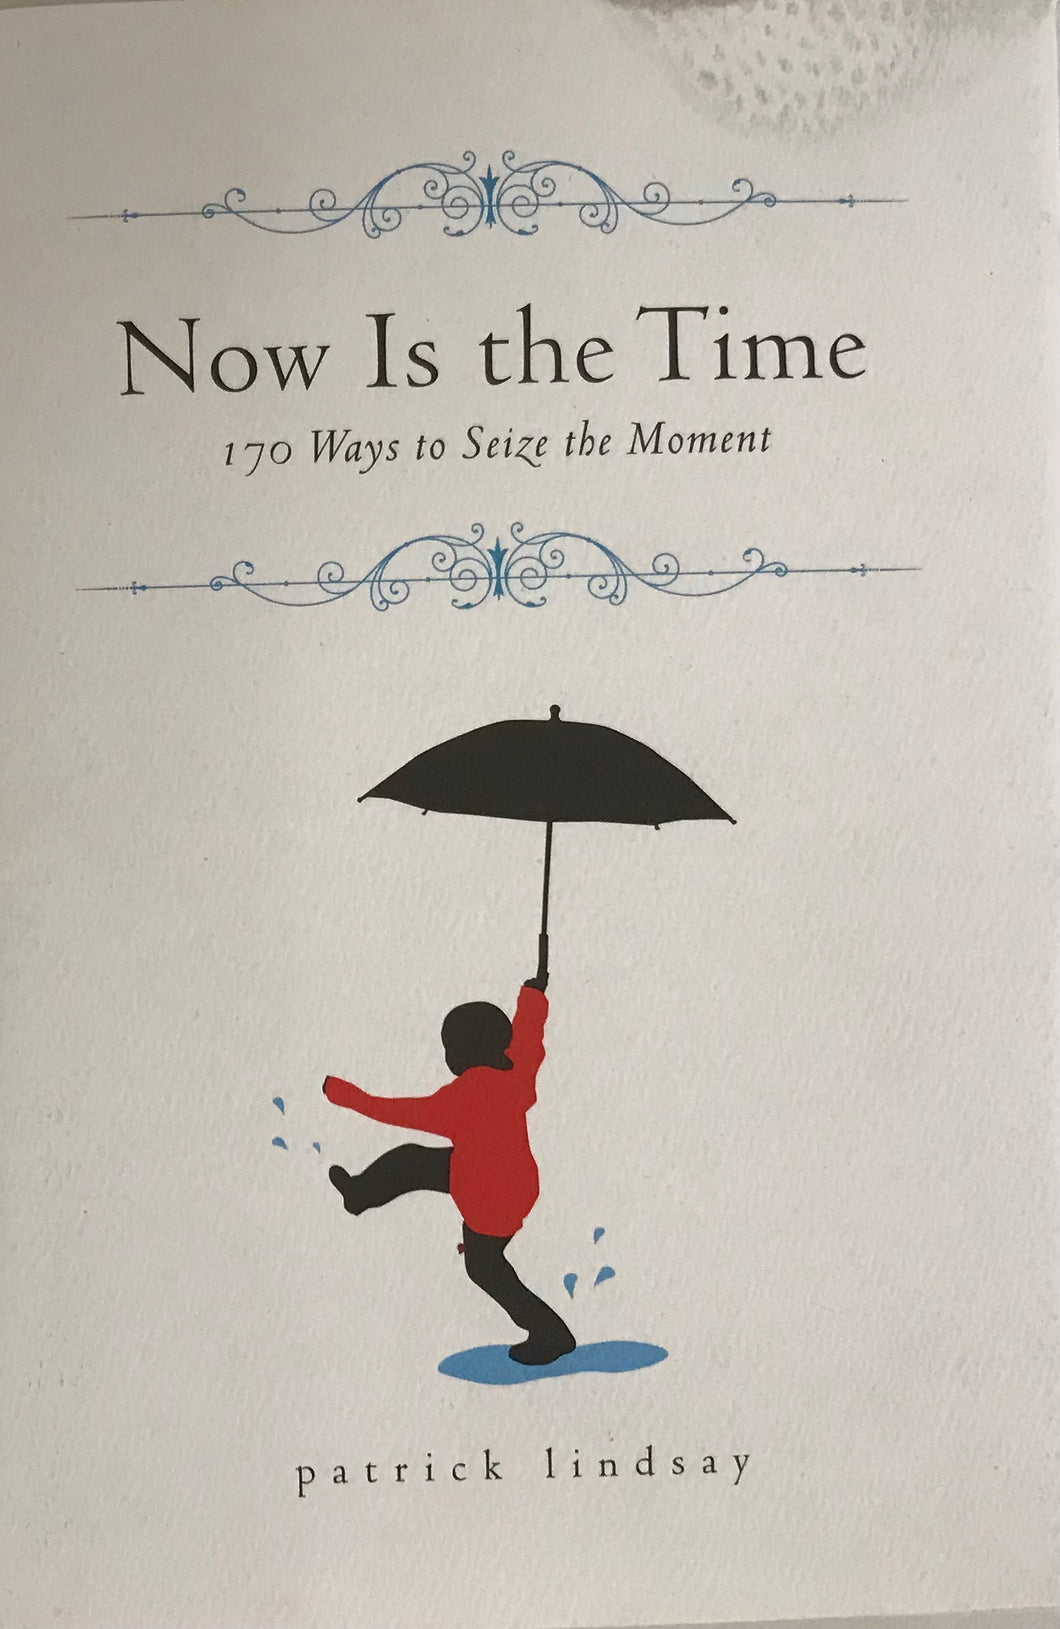 Now Is the Time, 170 Ways to Seize the Moment